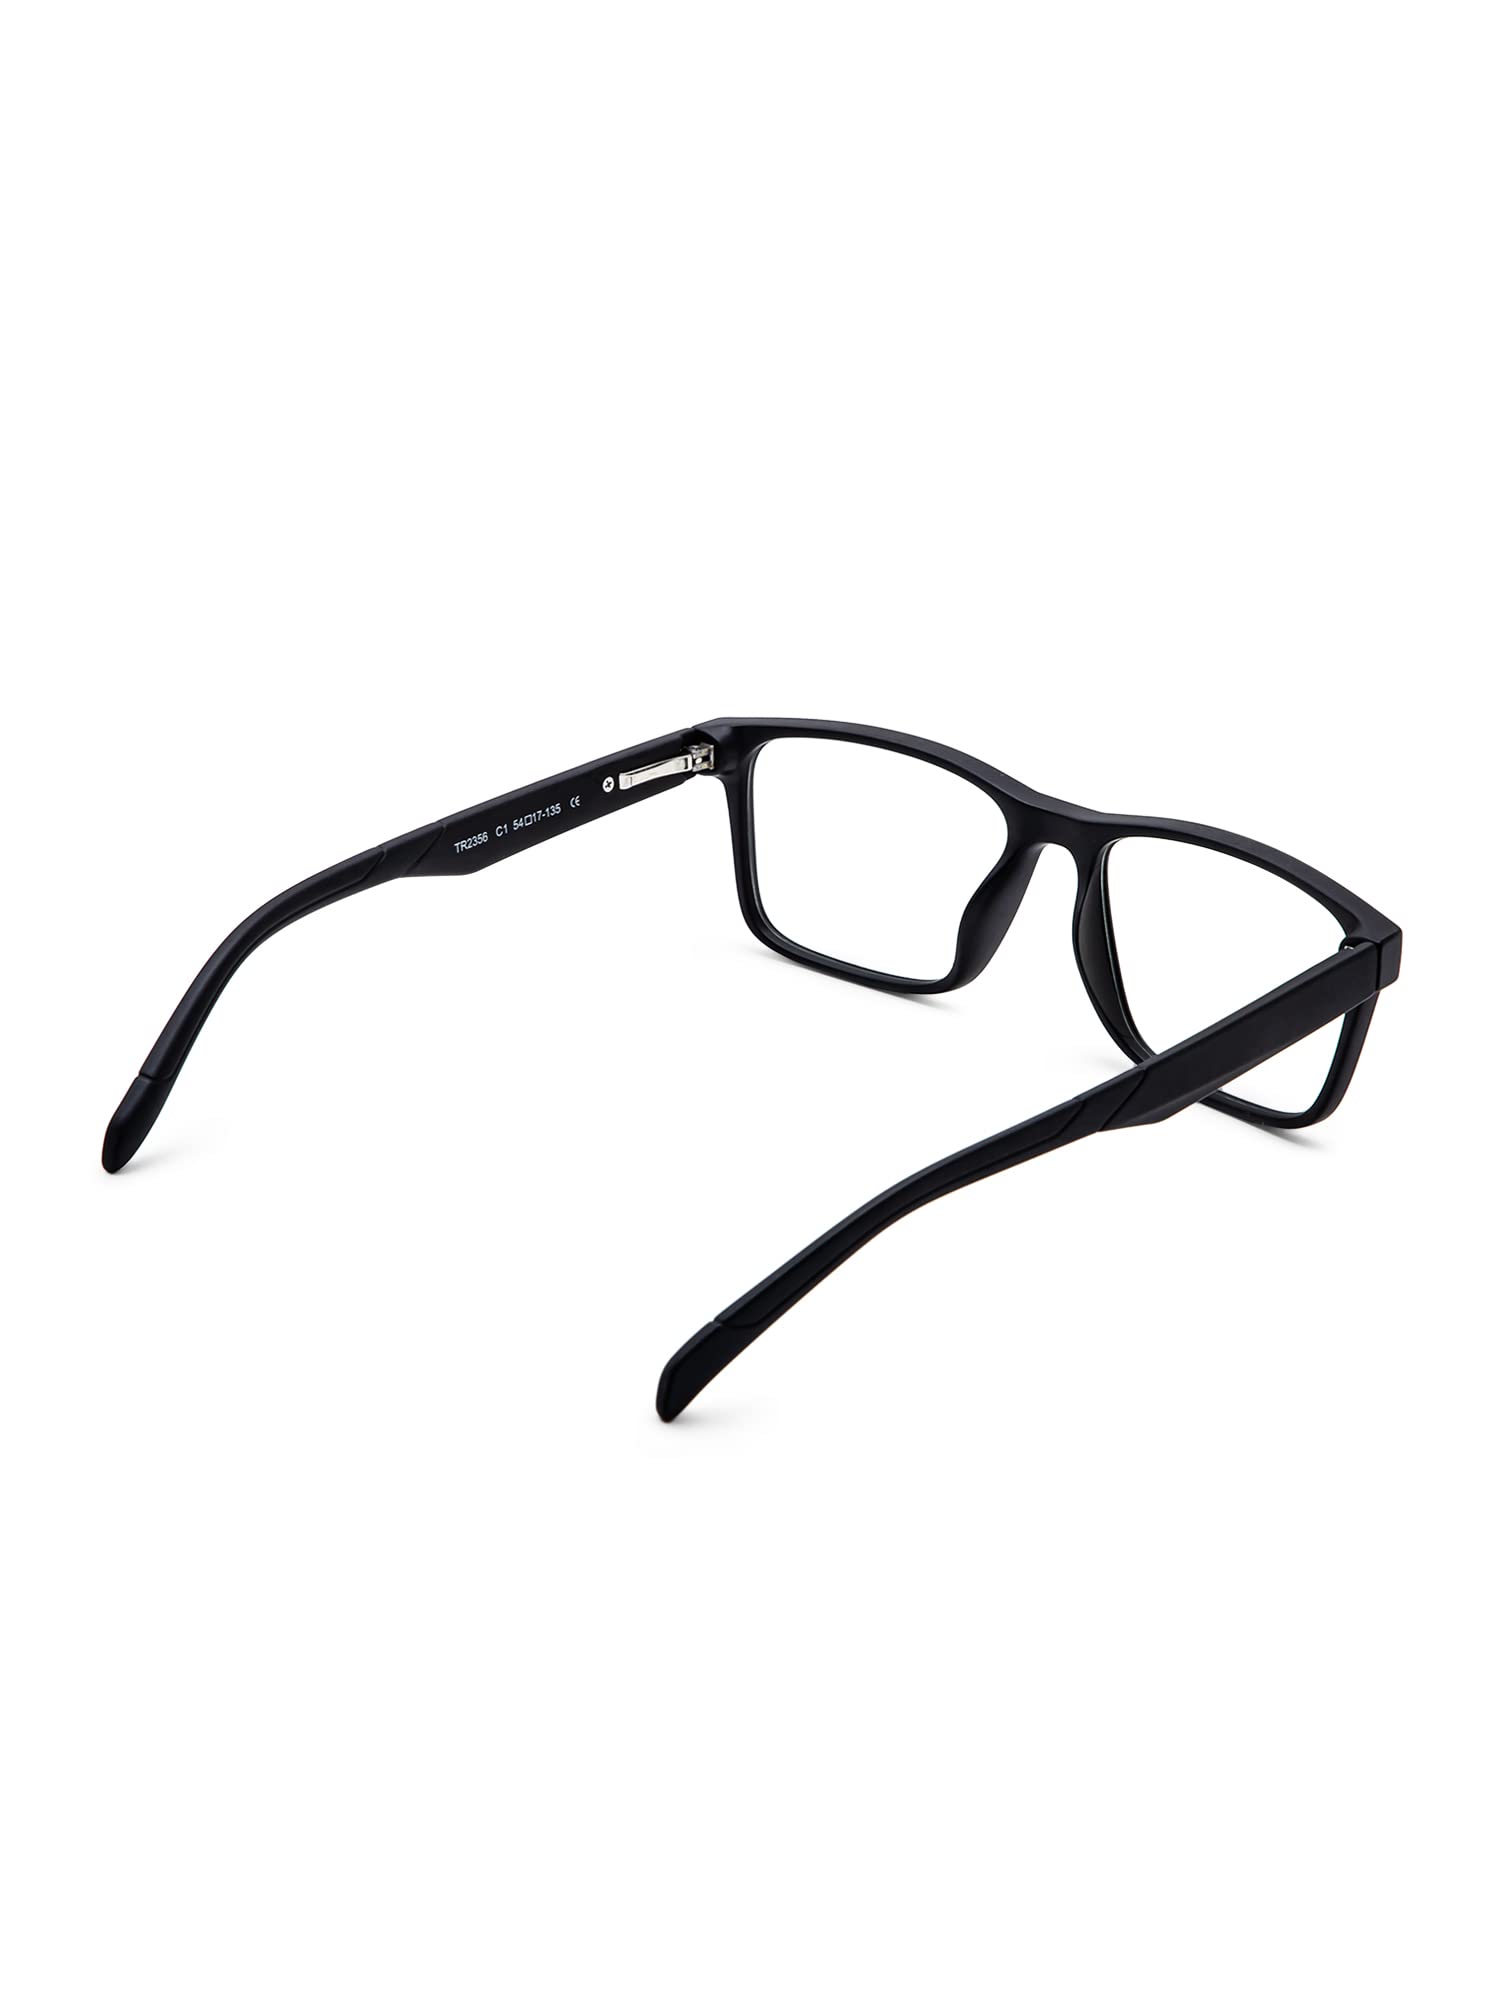 Intellilens Square Blue Cut Computer Glasses for Eye Protection with Lens Cleaner Solution for Spectacles | Zero Power, Anti Glare & Blue Light Filter Glasses | (Matte Black & Black) (54-17-135)